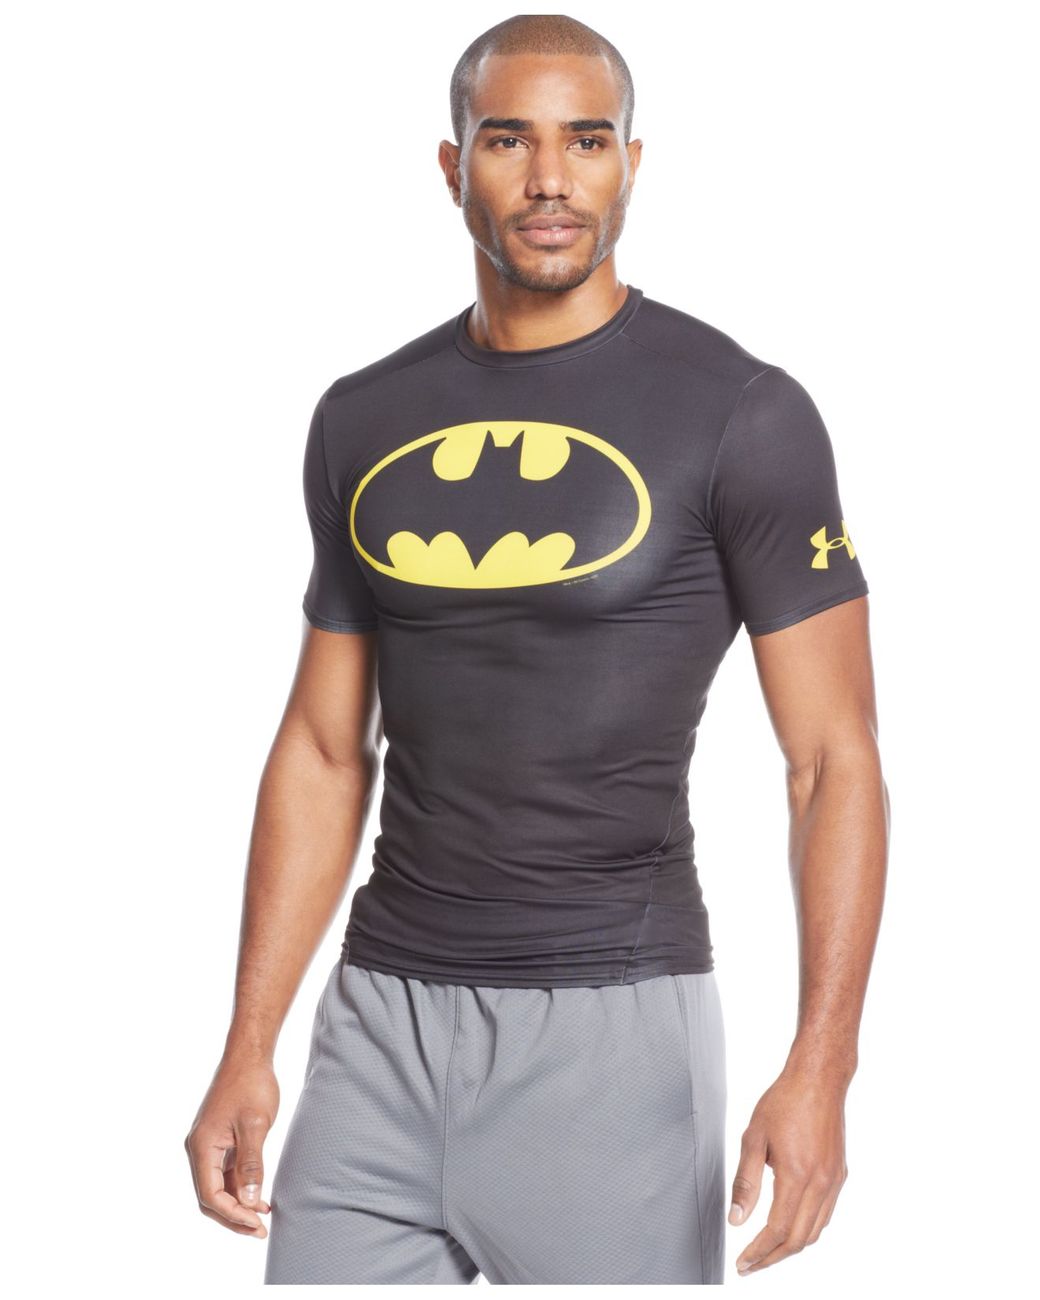 Details about   UNDER ARMOUR Batman Alter Ego HEAT GEAR Fitted COMPRESSION SHIRT Black BOYS YLG 